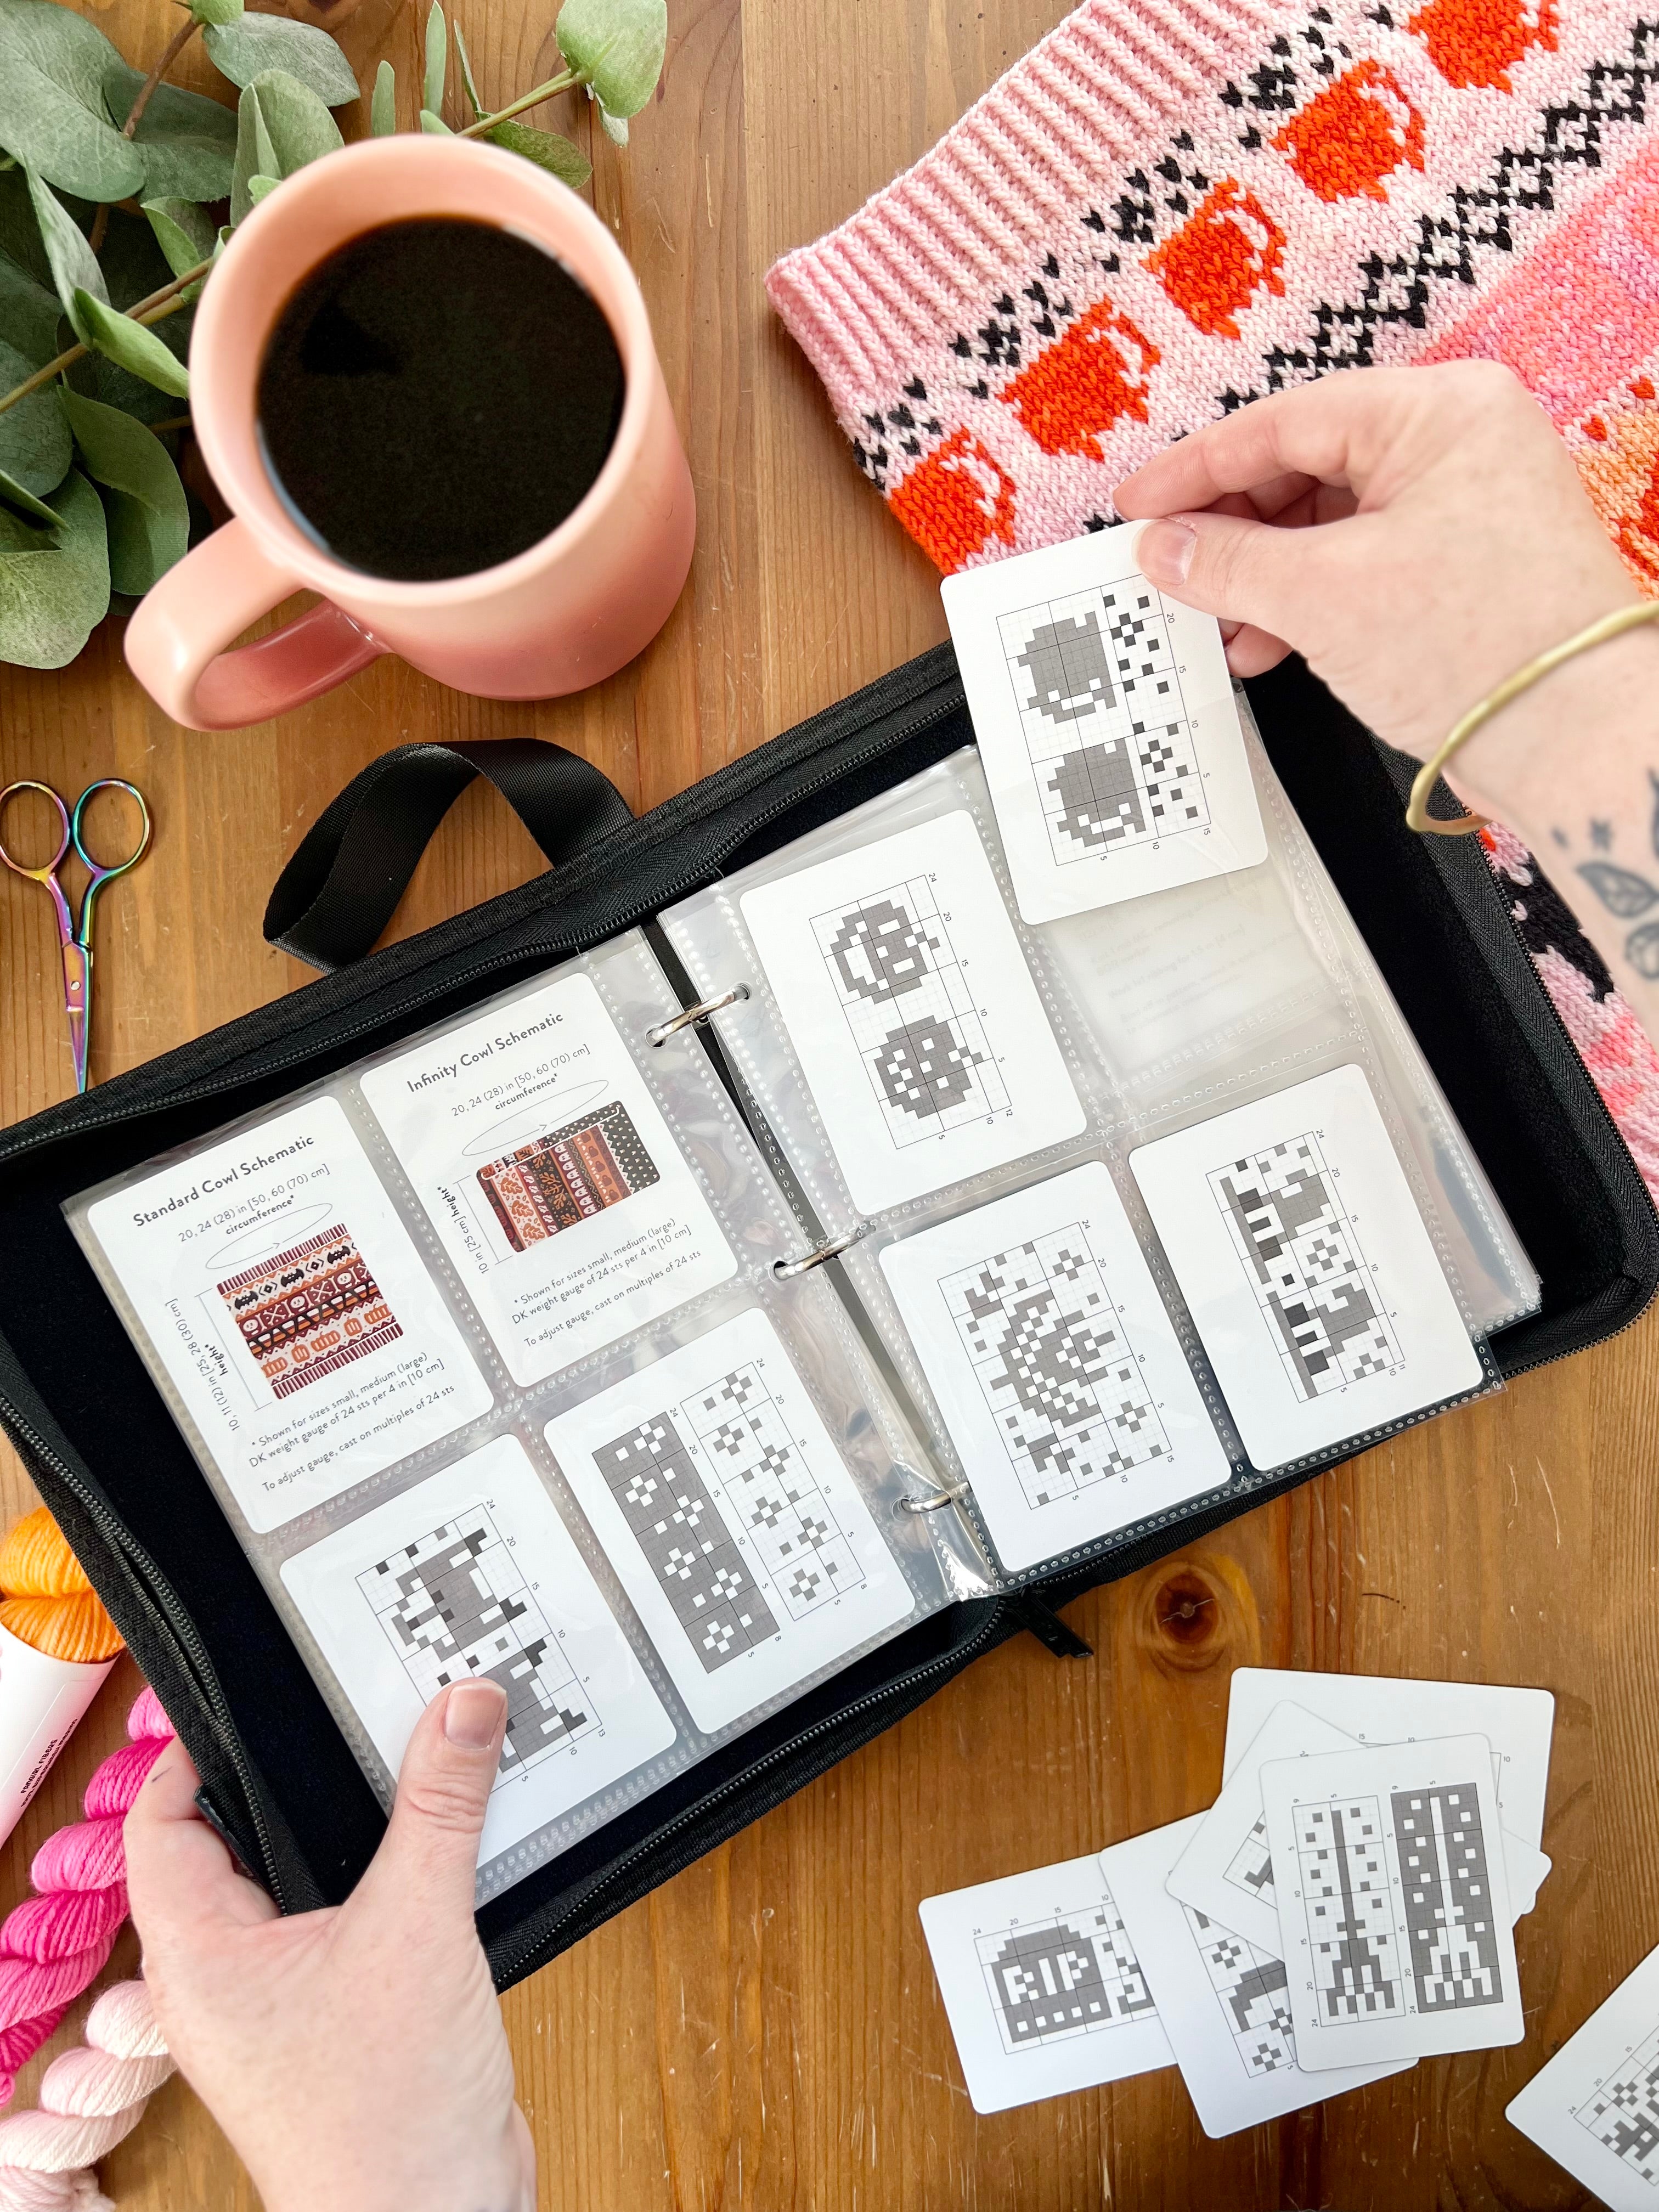 5 Doodle Card Binders: The Ultimate Solution for Organizing Your Knitting Cards